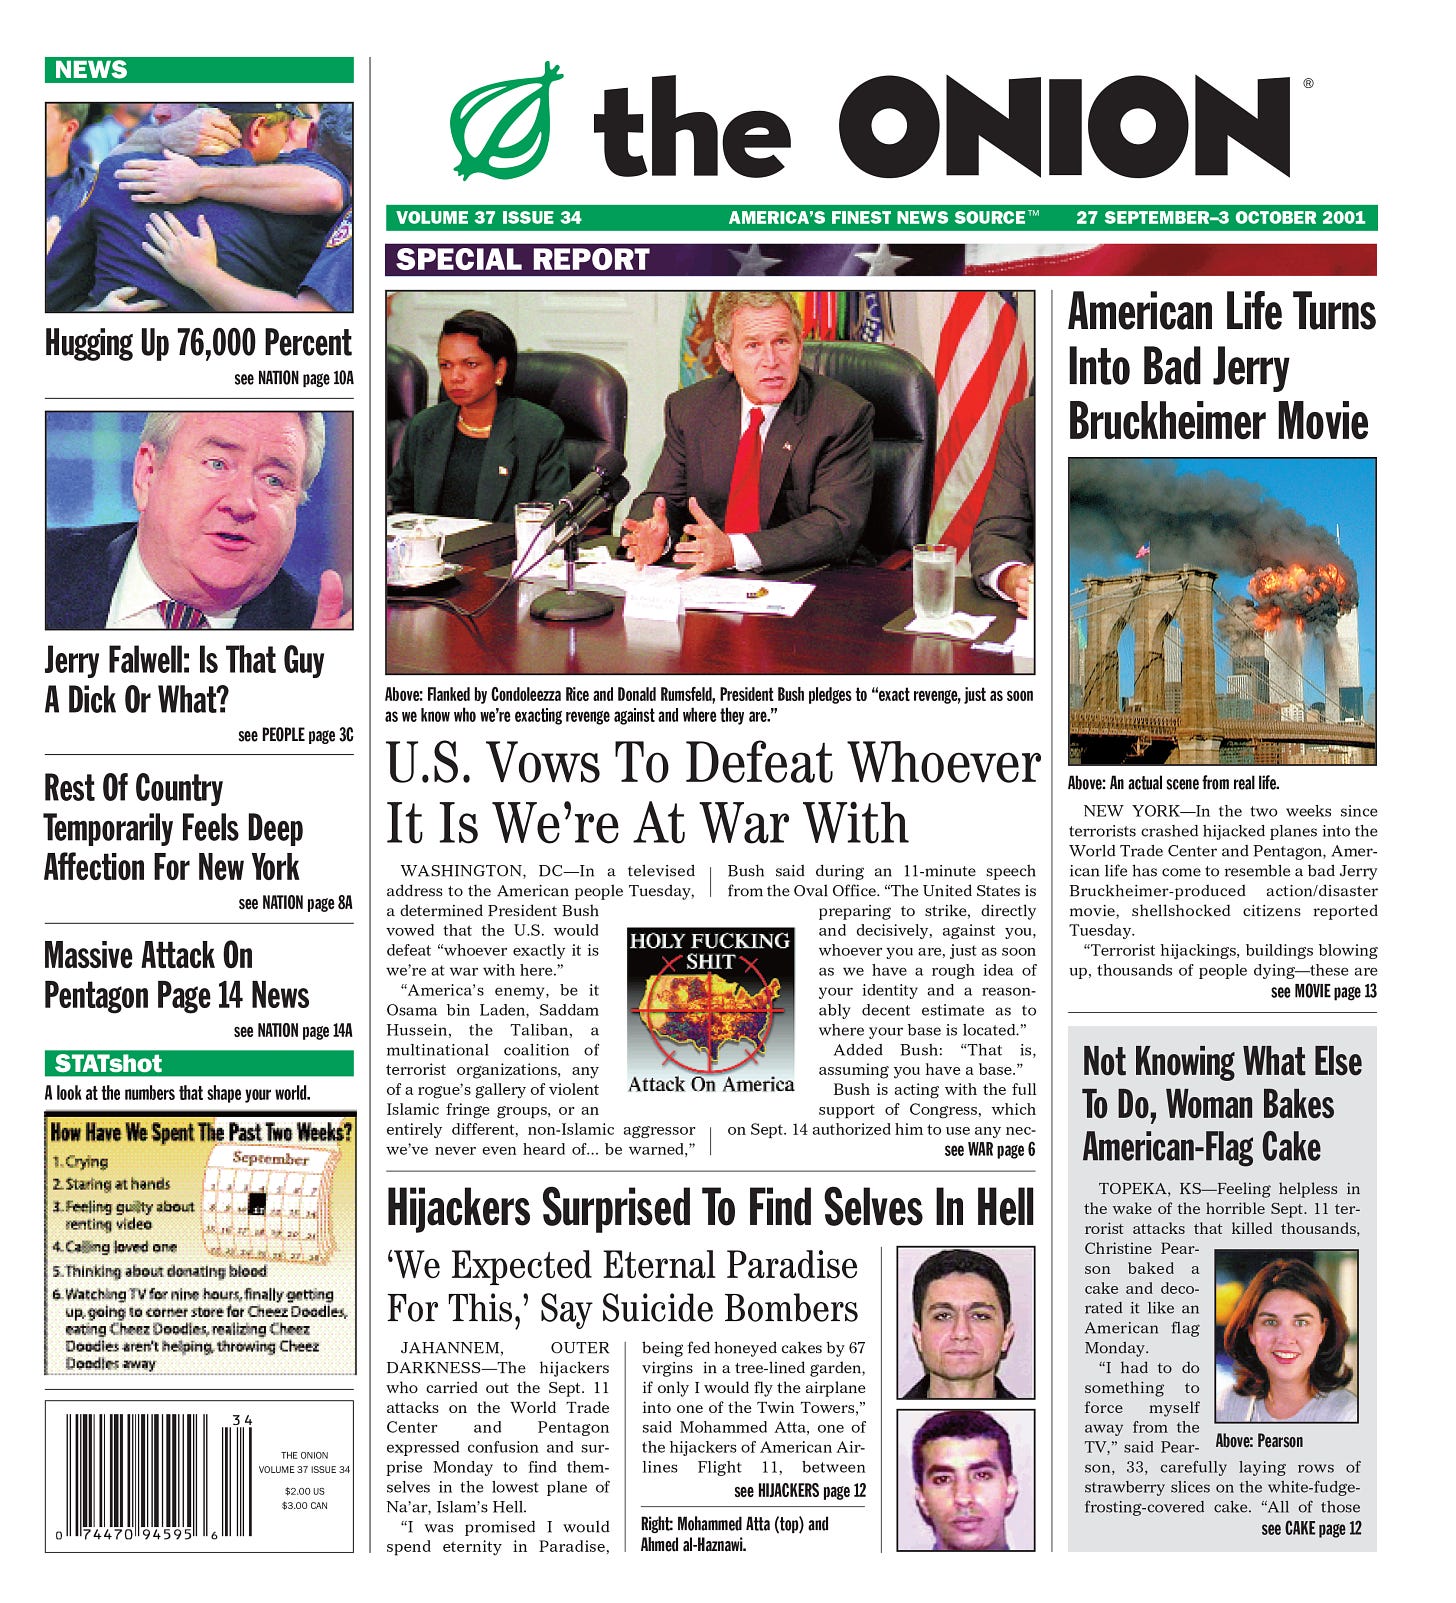 The Onion's front page from Sept. 26, 2001